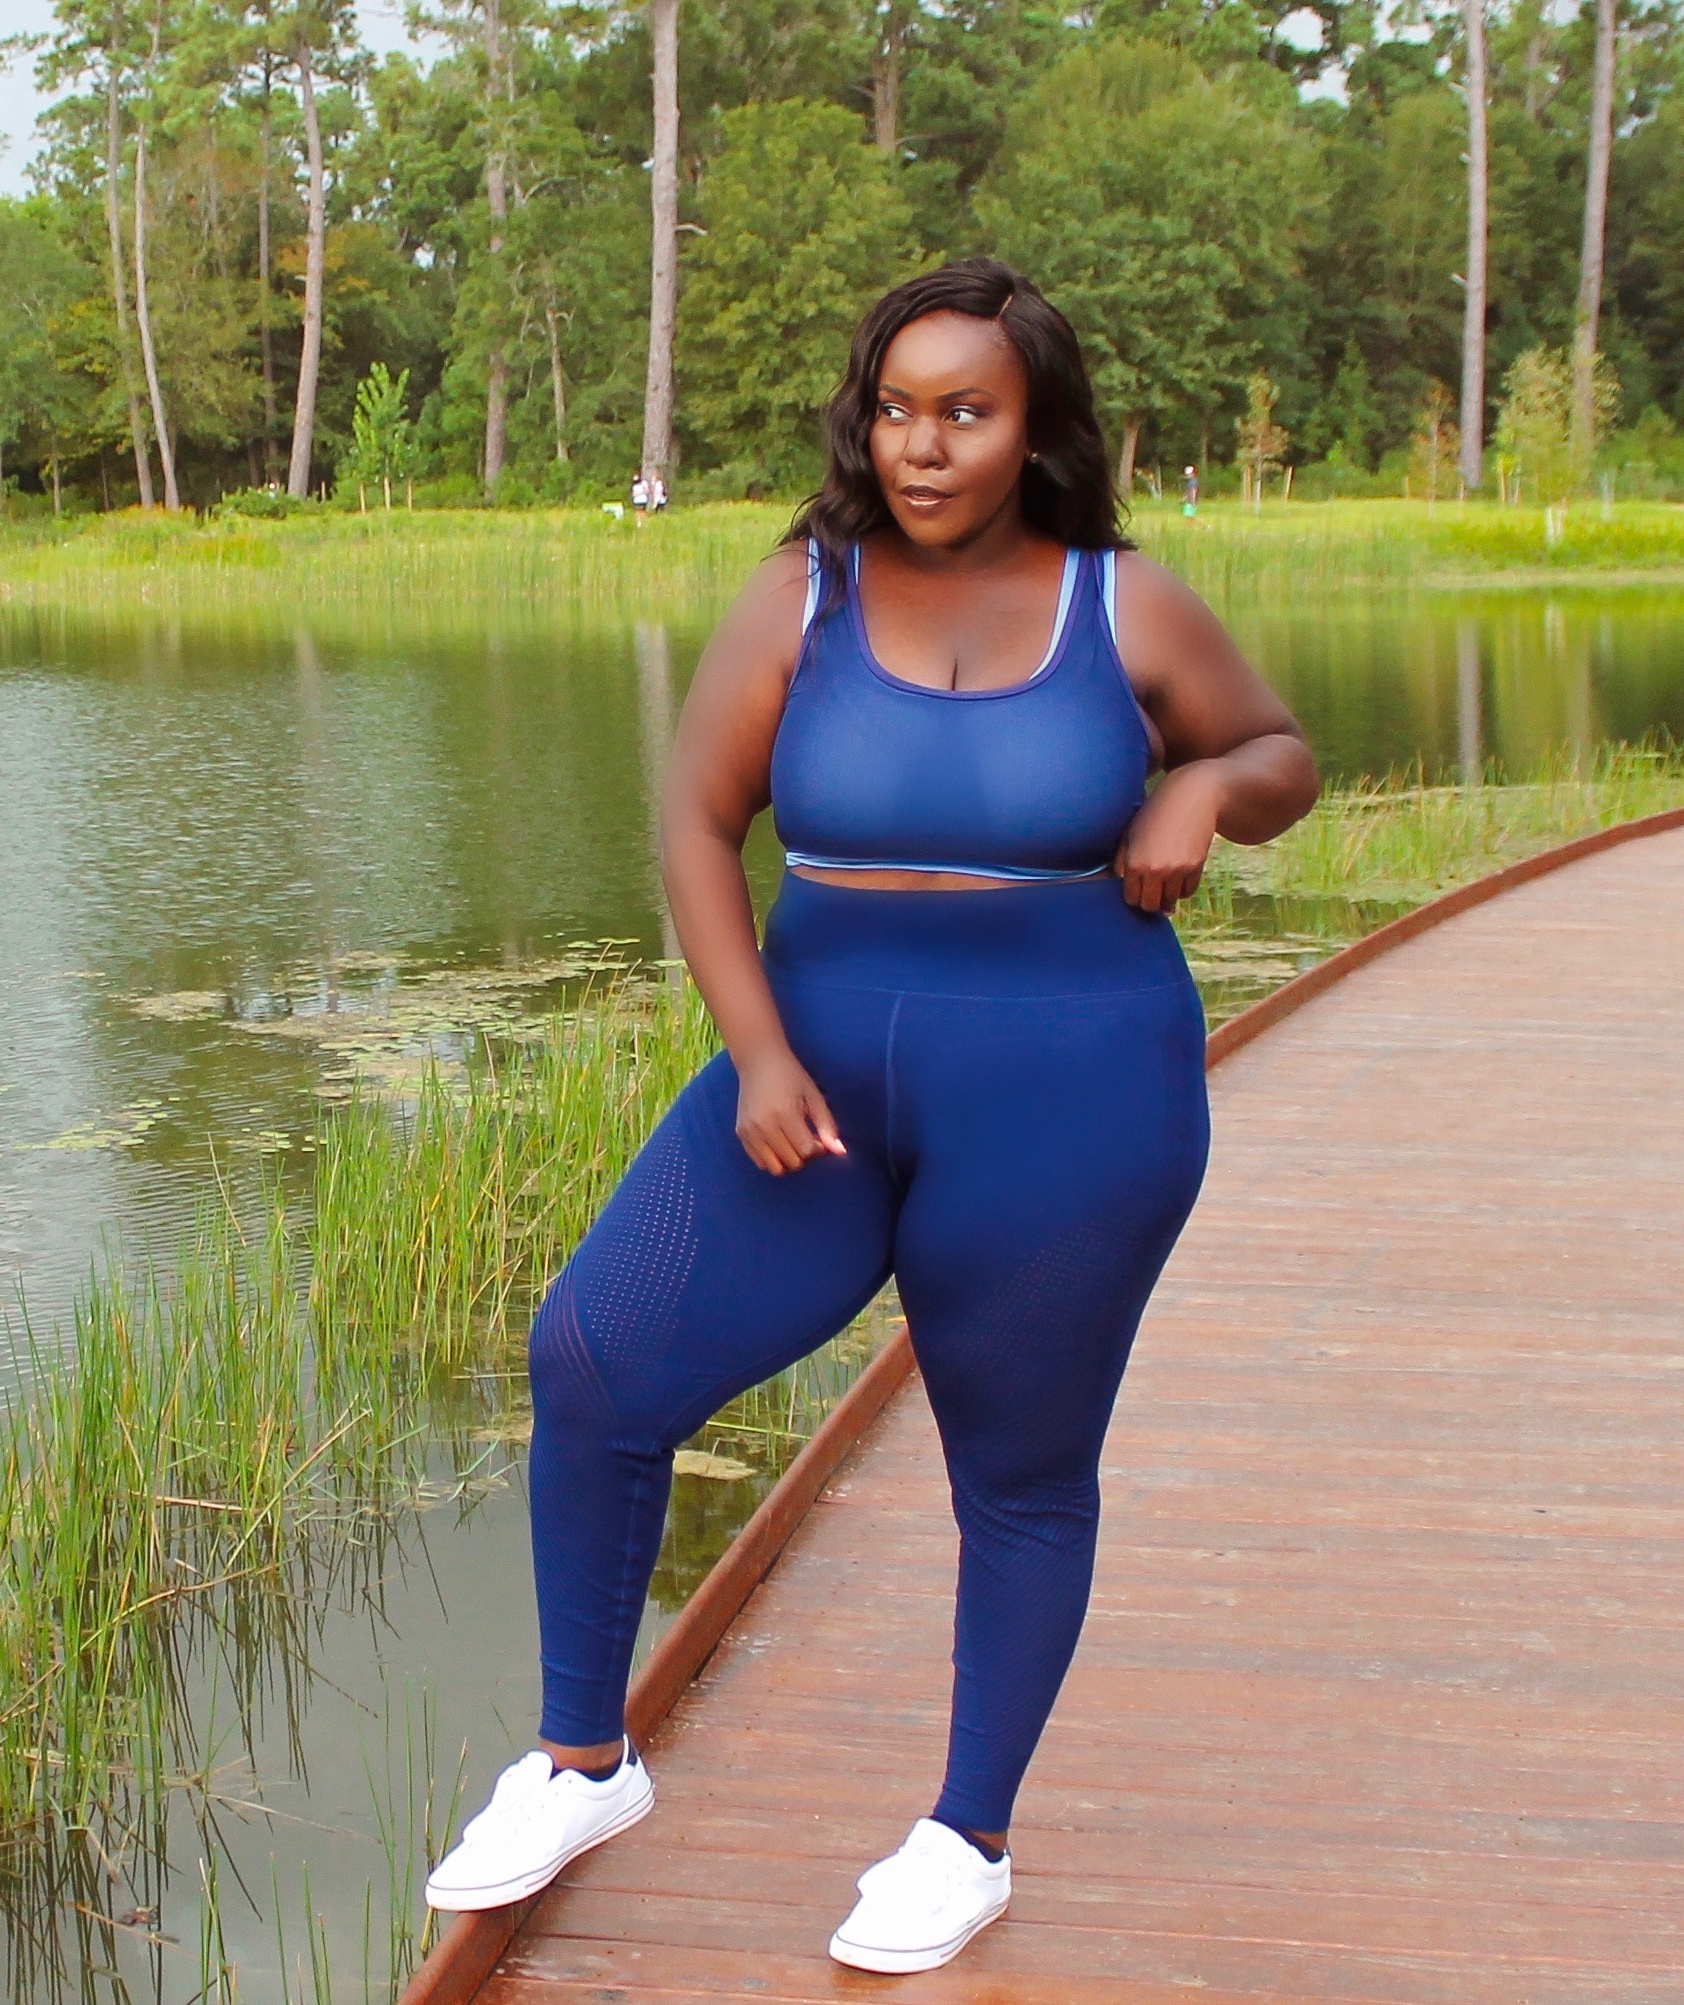 Clay Family Eastern Glades Memorial Park Conservancy, houston influencer, fabletics active, fabletics review plus size, move in fabletics, athleisure nike puma plus size fashion blogs 2019, beautiful curvy girls, beautiful plus size dark skin girls, plus size black bloggers, clothes for curvy girls, curvy girl fashion clothing, plus blog, plus size fashion tips, plus size women blog, curvy women fashion, plus blog, curvy girl fashion blog, style plus curves, plus size fashion instagram, curvy girl blog, bbw blog, plus size street fashion, plus size beauty blog, plus size fashion ideas, curvy girl summer outfits, plus size fashion magazine, plus fashion bloggers, zara